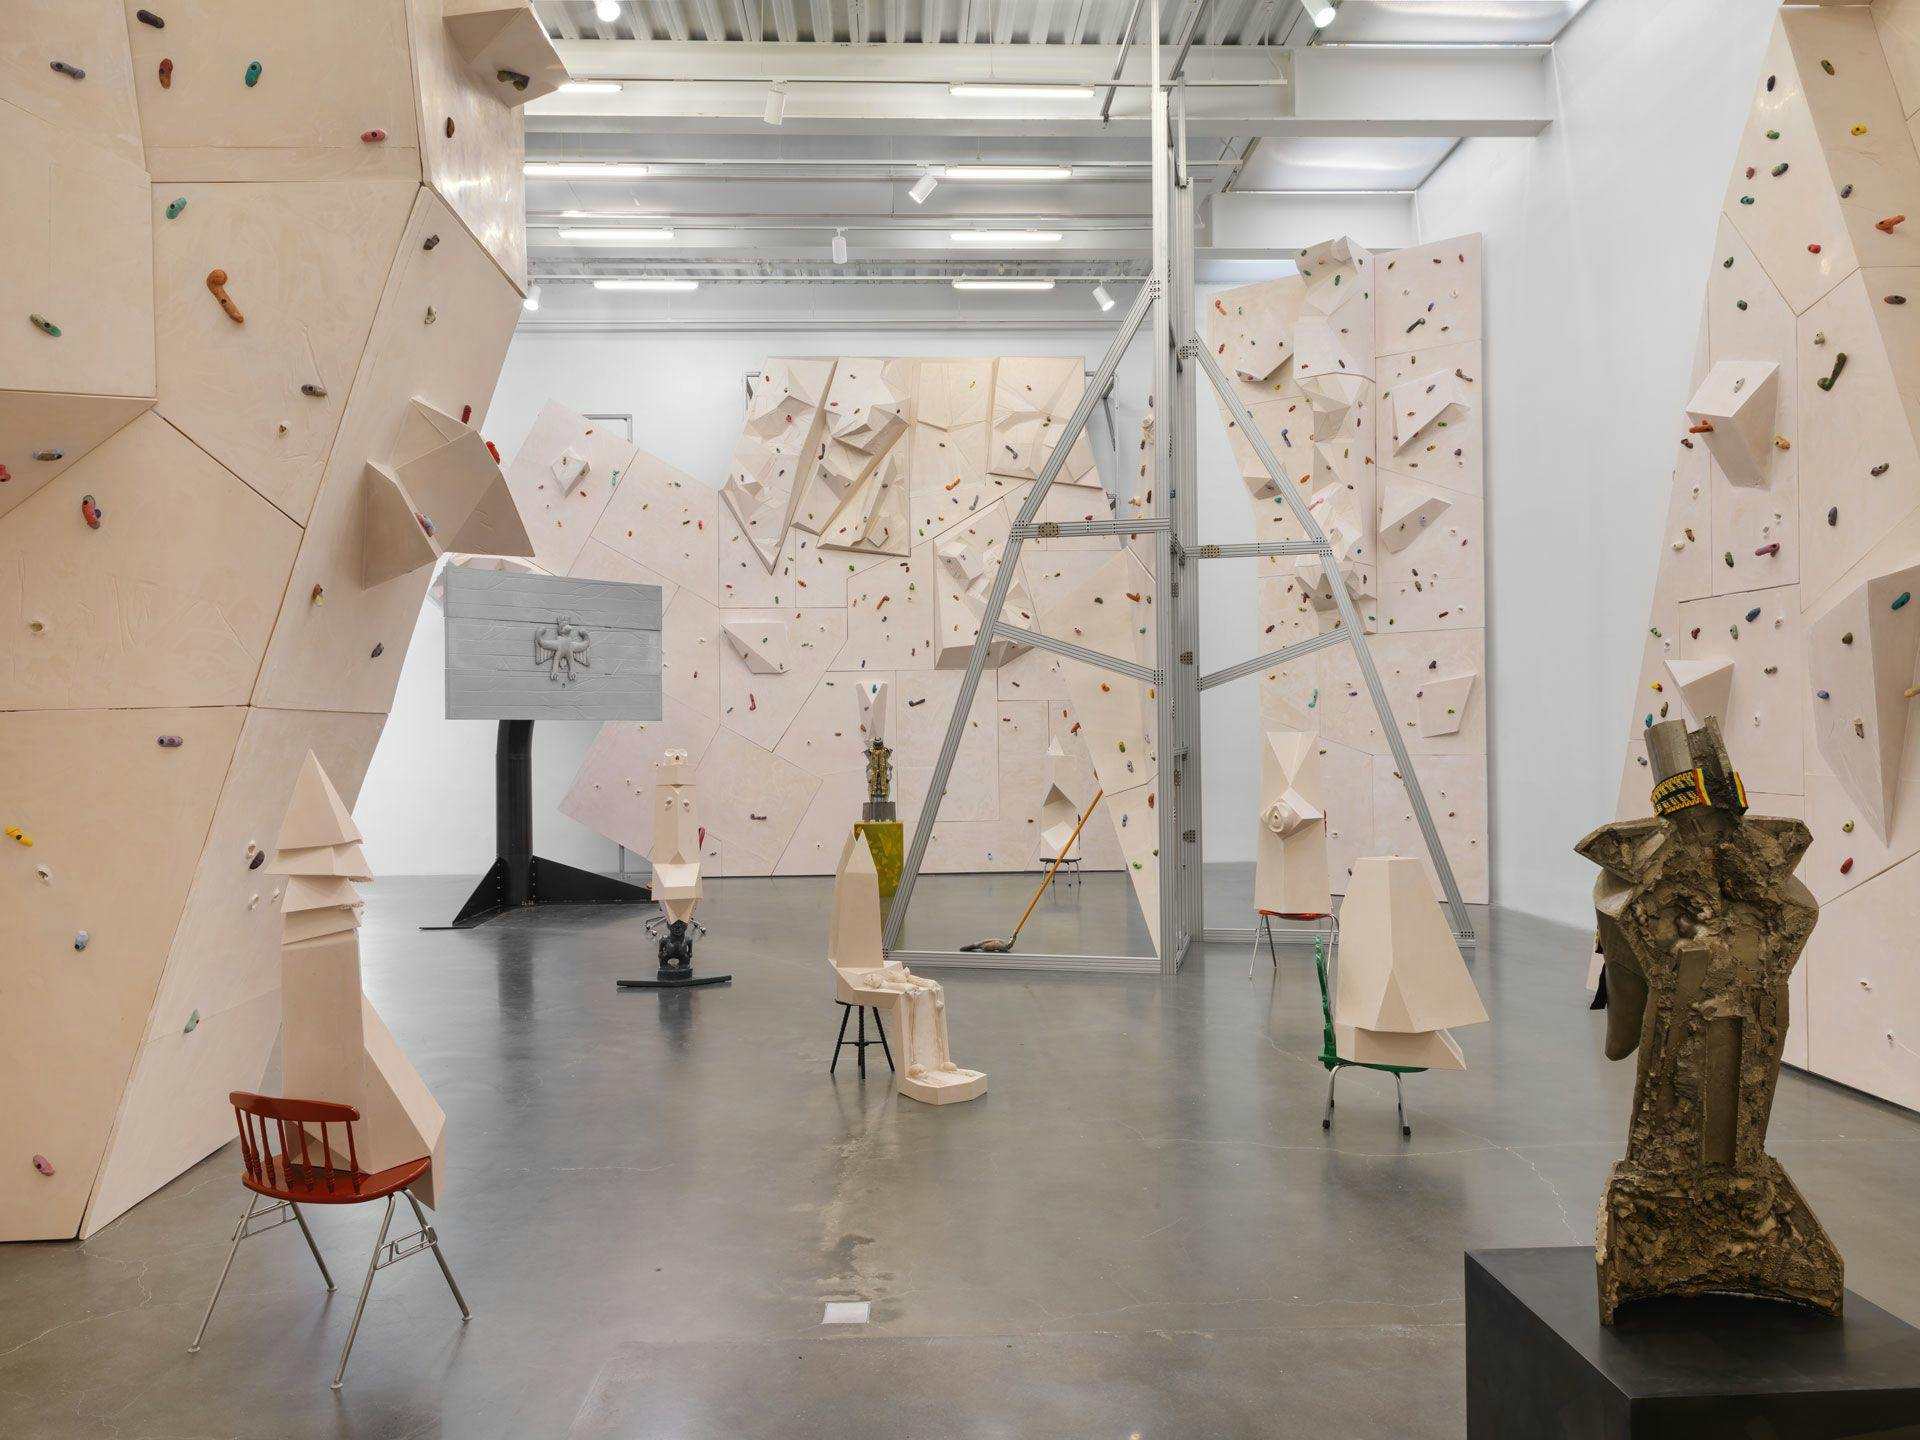 Installation view of the exhibition Alps, by Andra Ursuta, at the New Museum in New York, dated 2016.